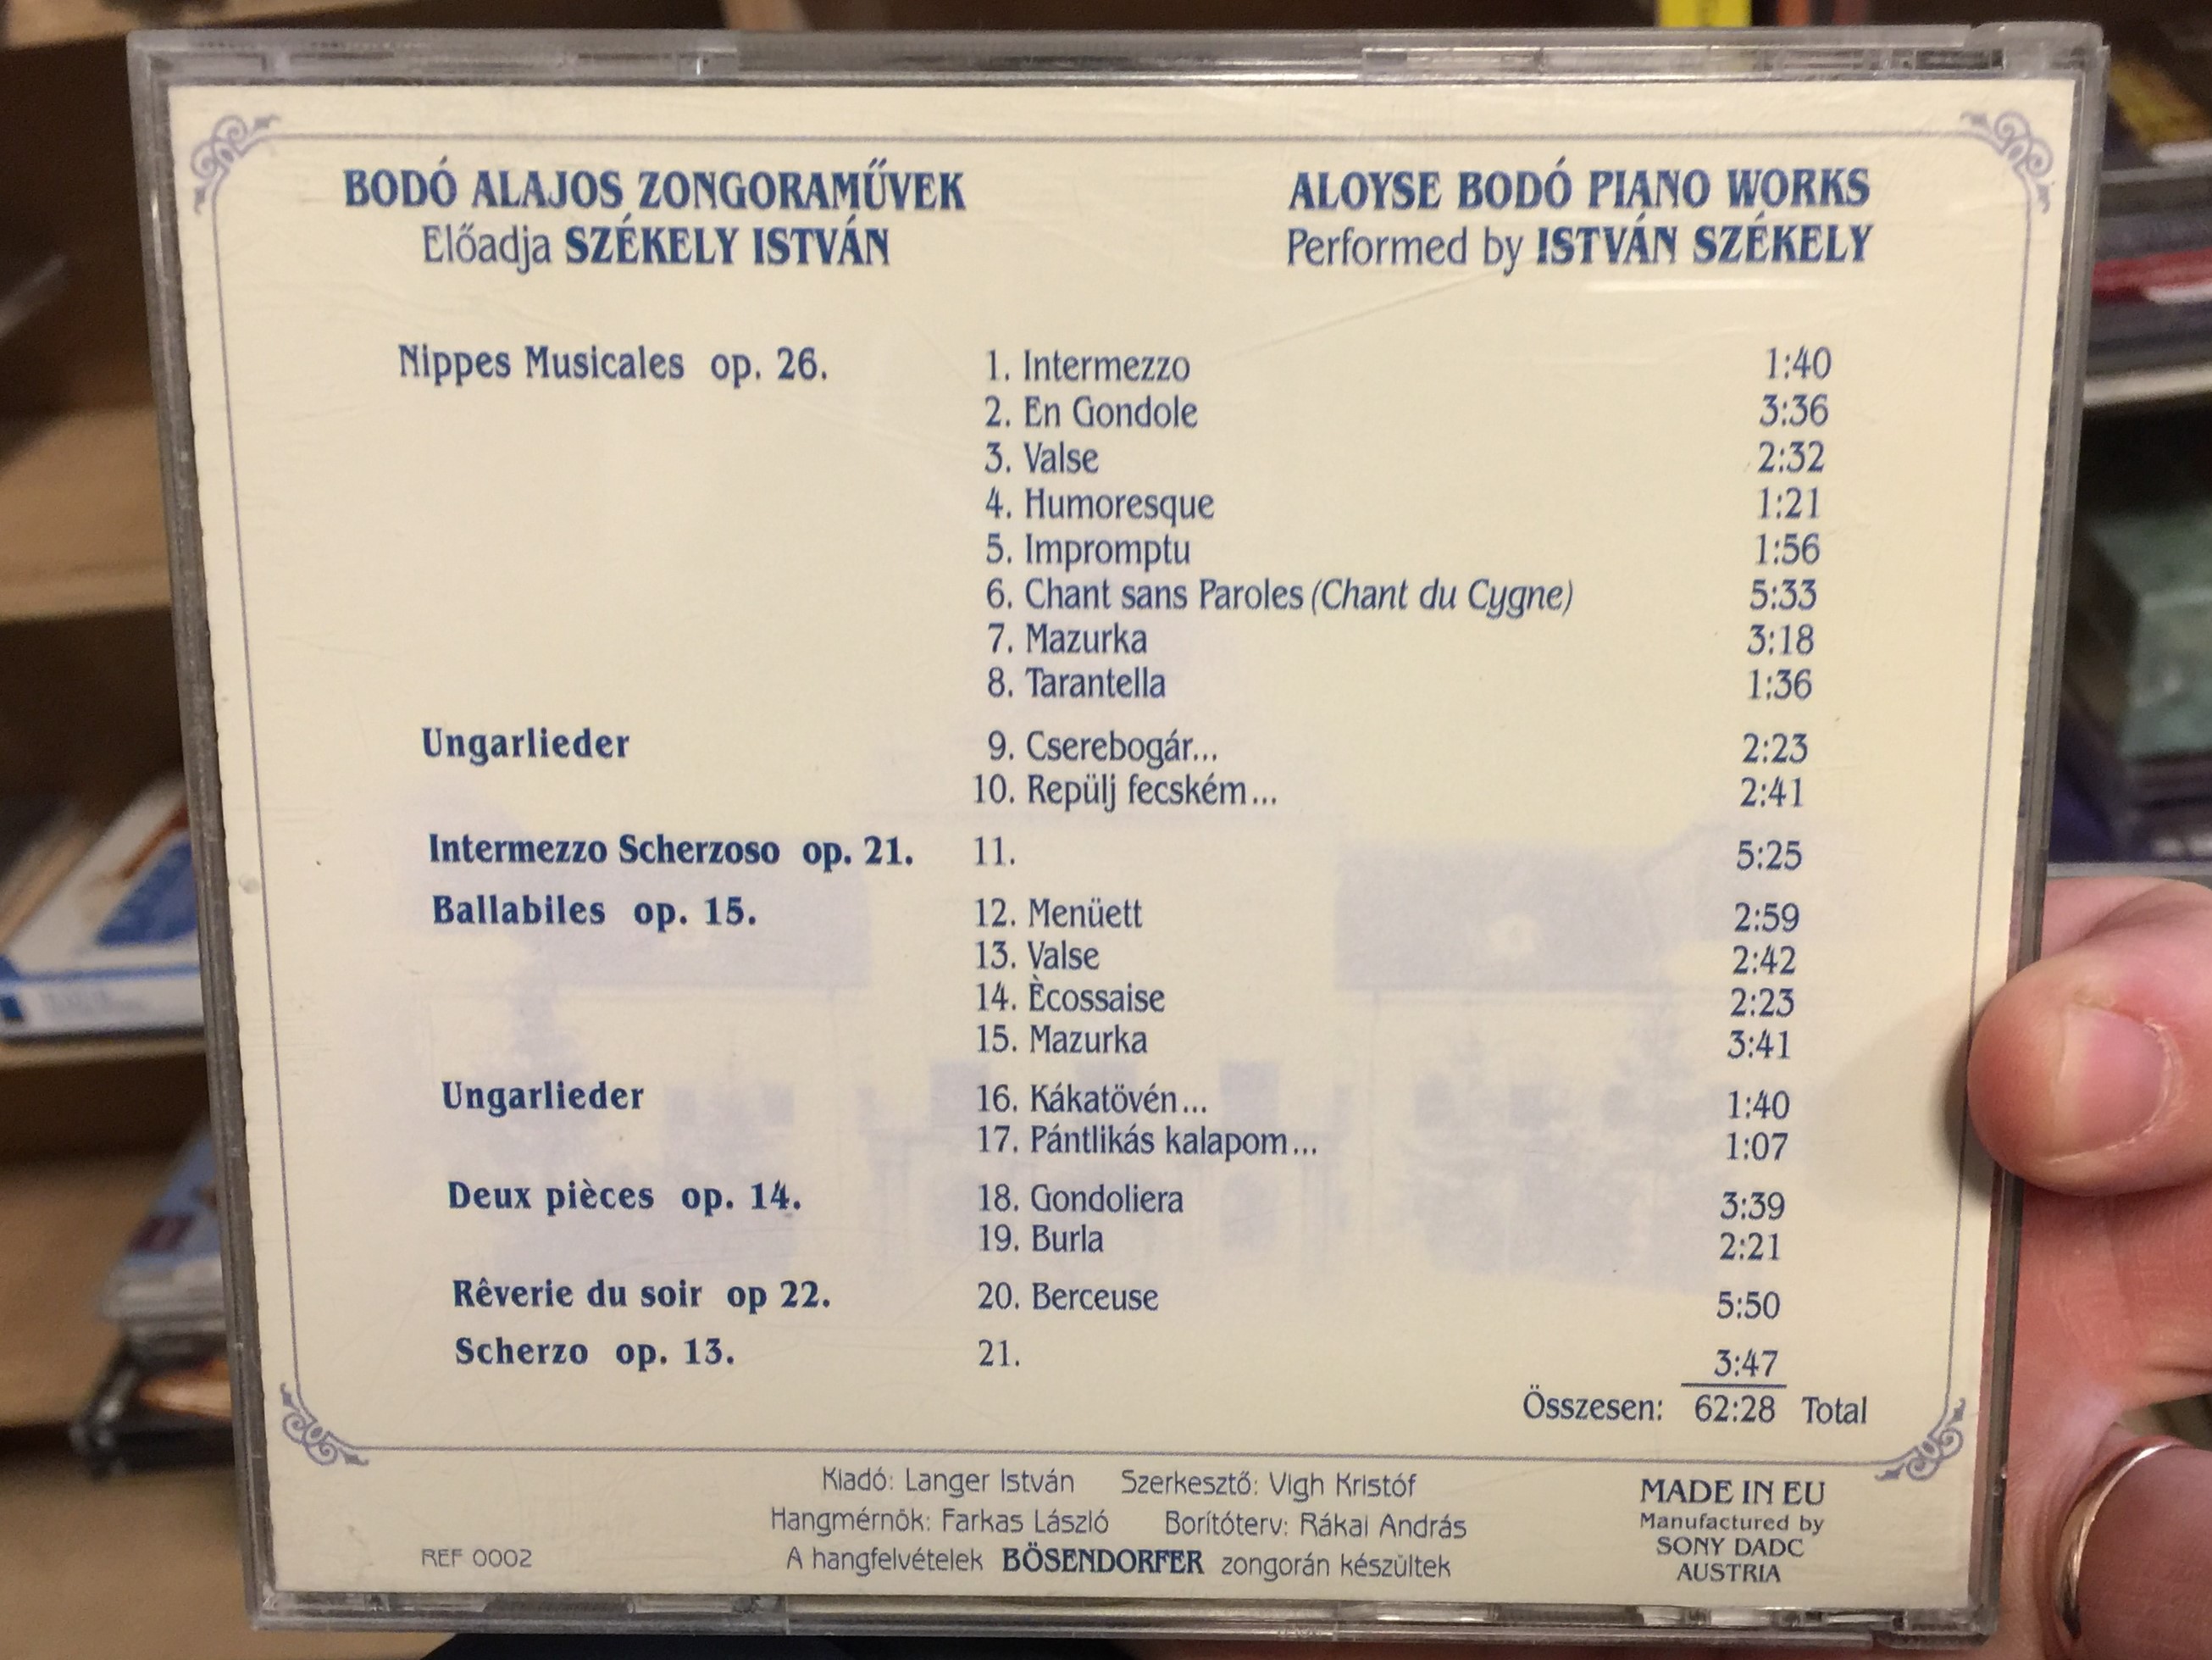 the-rediscovered-hungarian-piano-virtuoso-and-composer-bodo-alajos-1869-1931-piano-works-performed-by-szekely-istvan-refulgence-audio-cd-ref-0002-2-.jpg